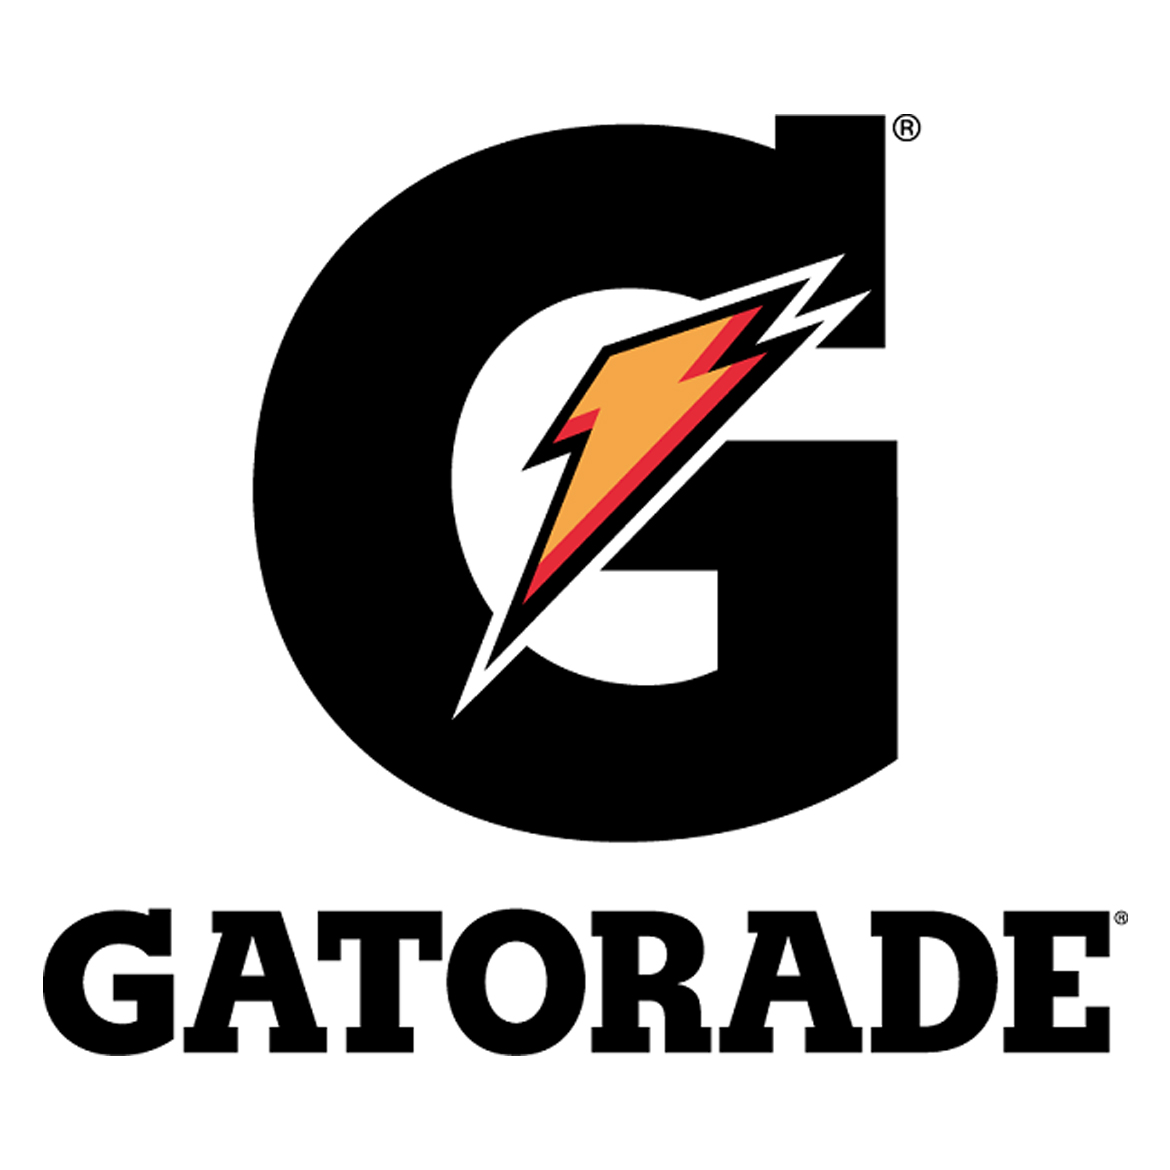 http://www.hoivend.com/img/projects/products/beverage/gatorade.jpg